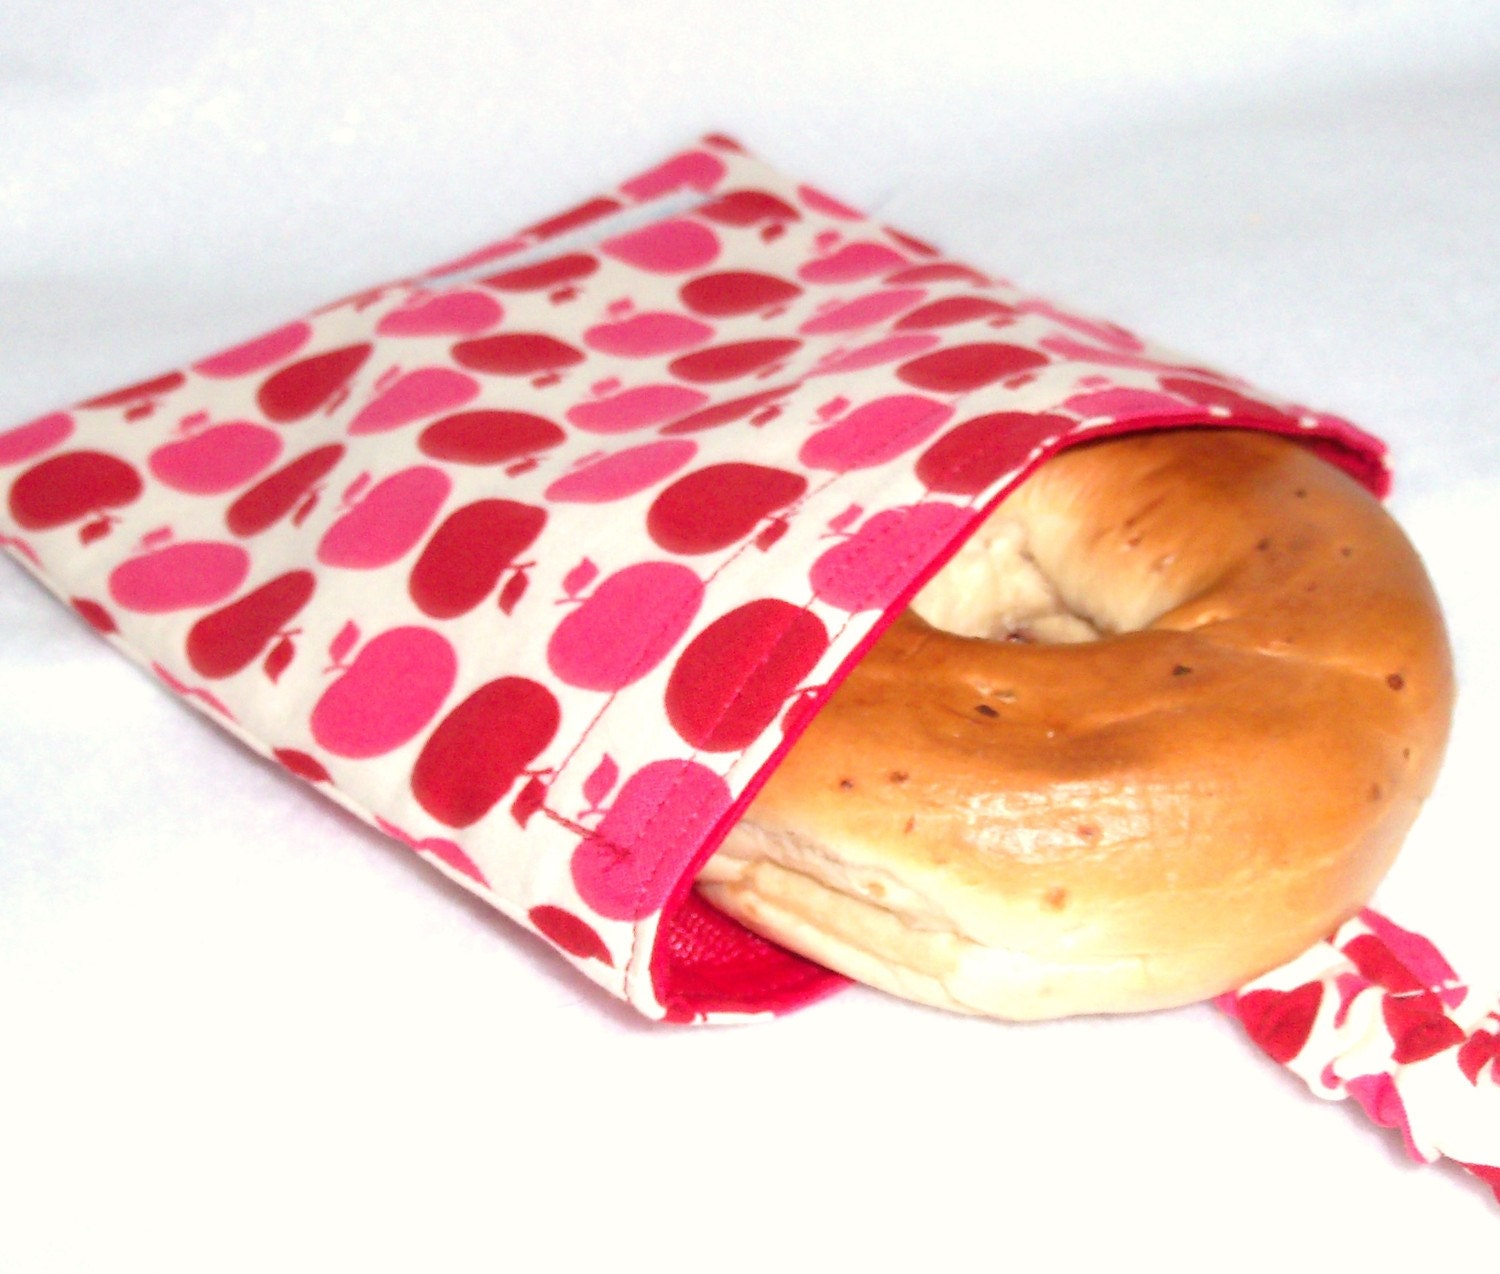 Earth Day SALE - 22% Off  Reusable, Eco-friendly Sandwich Bag (Red Farmer's Market Apples) - FREE SHIPPING on All Additional Items